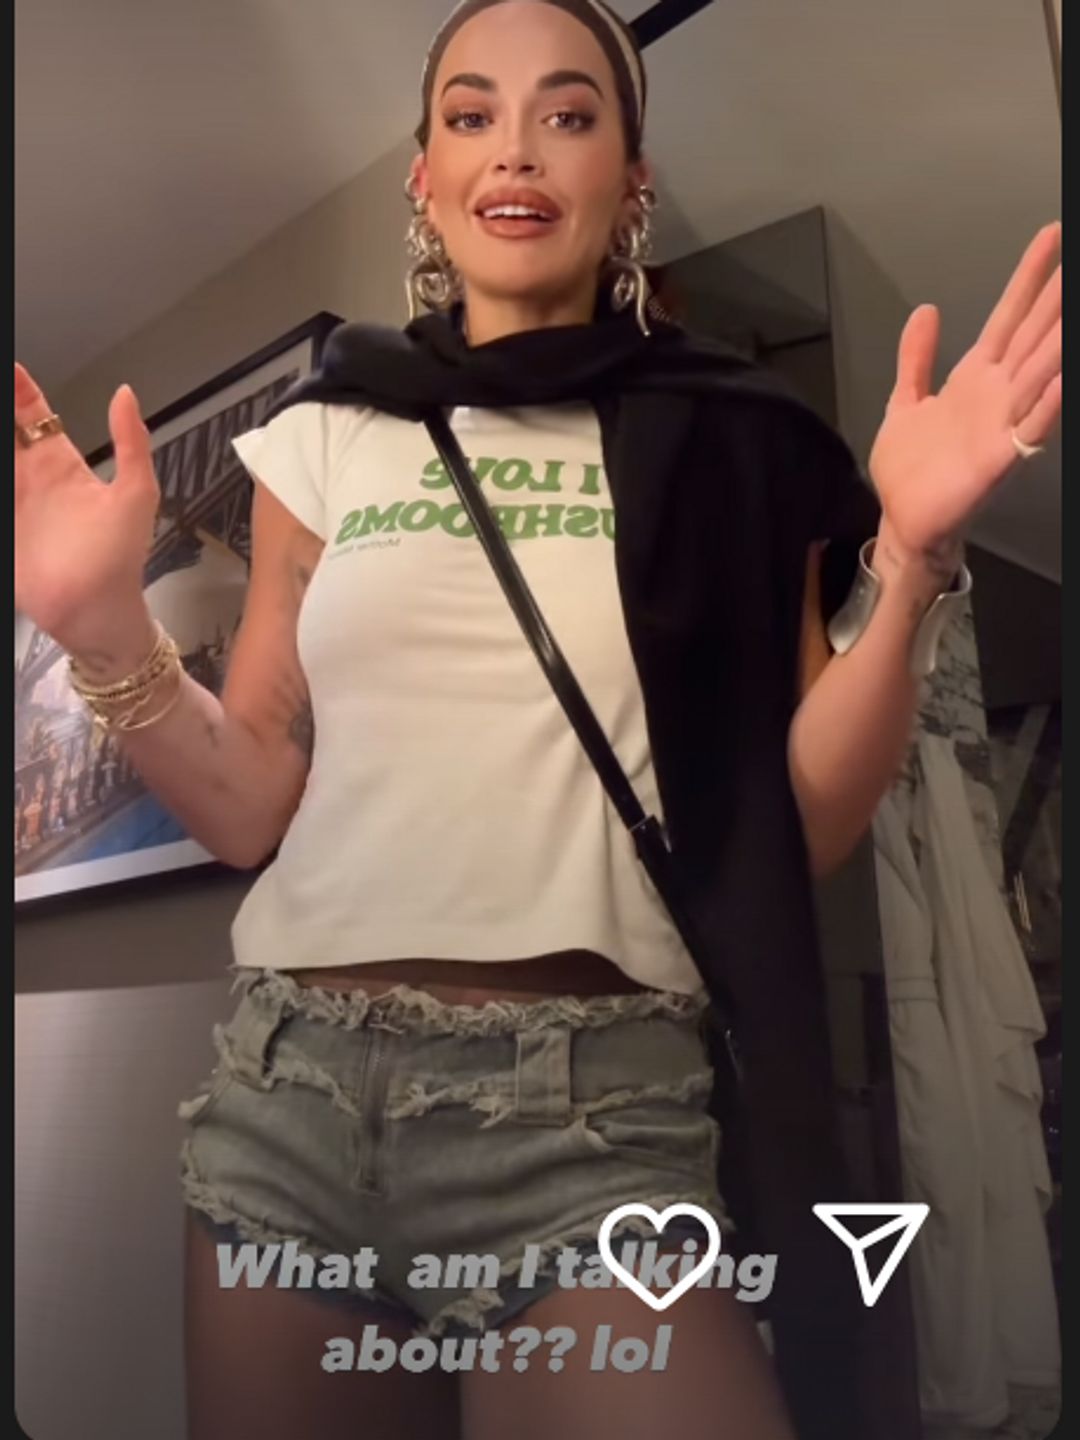 Rita shared her outfit with her Instagram followers